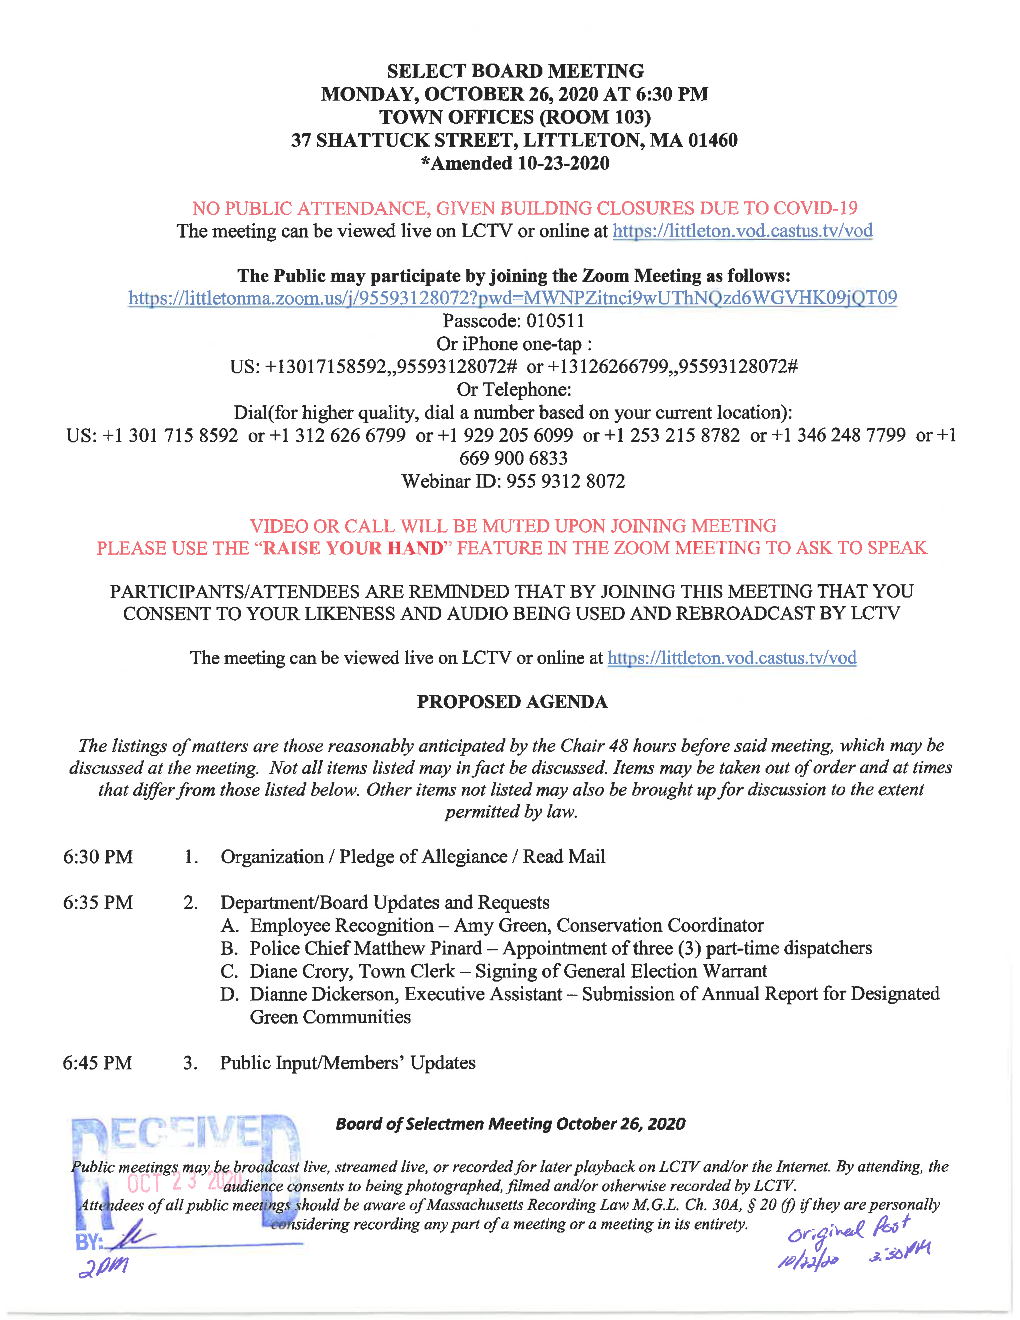 October 26, 2020 Select Board Meeting Packet